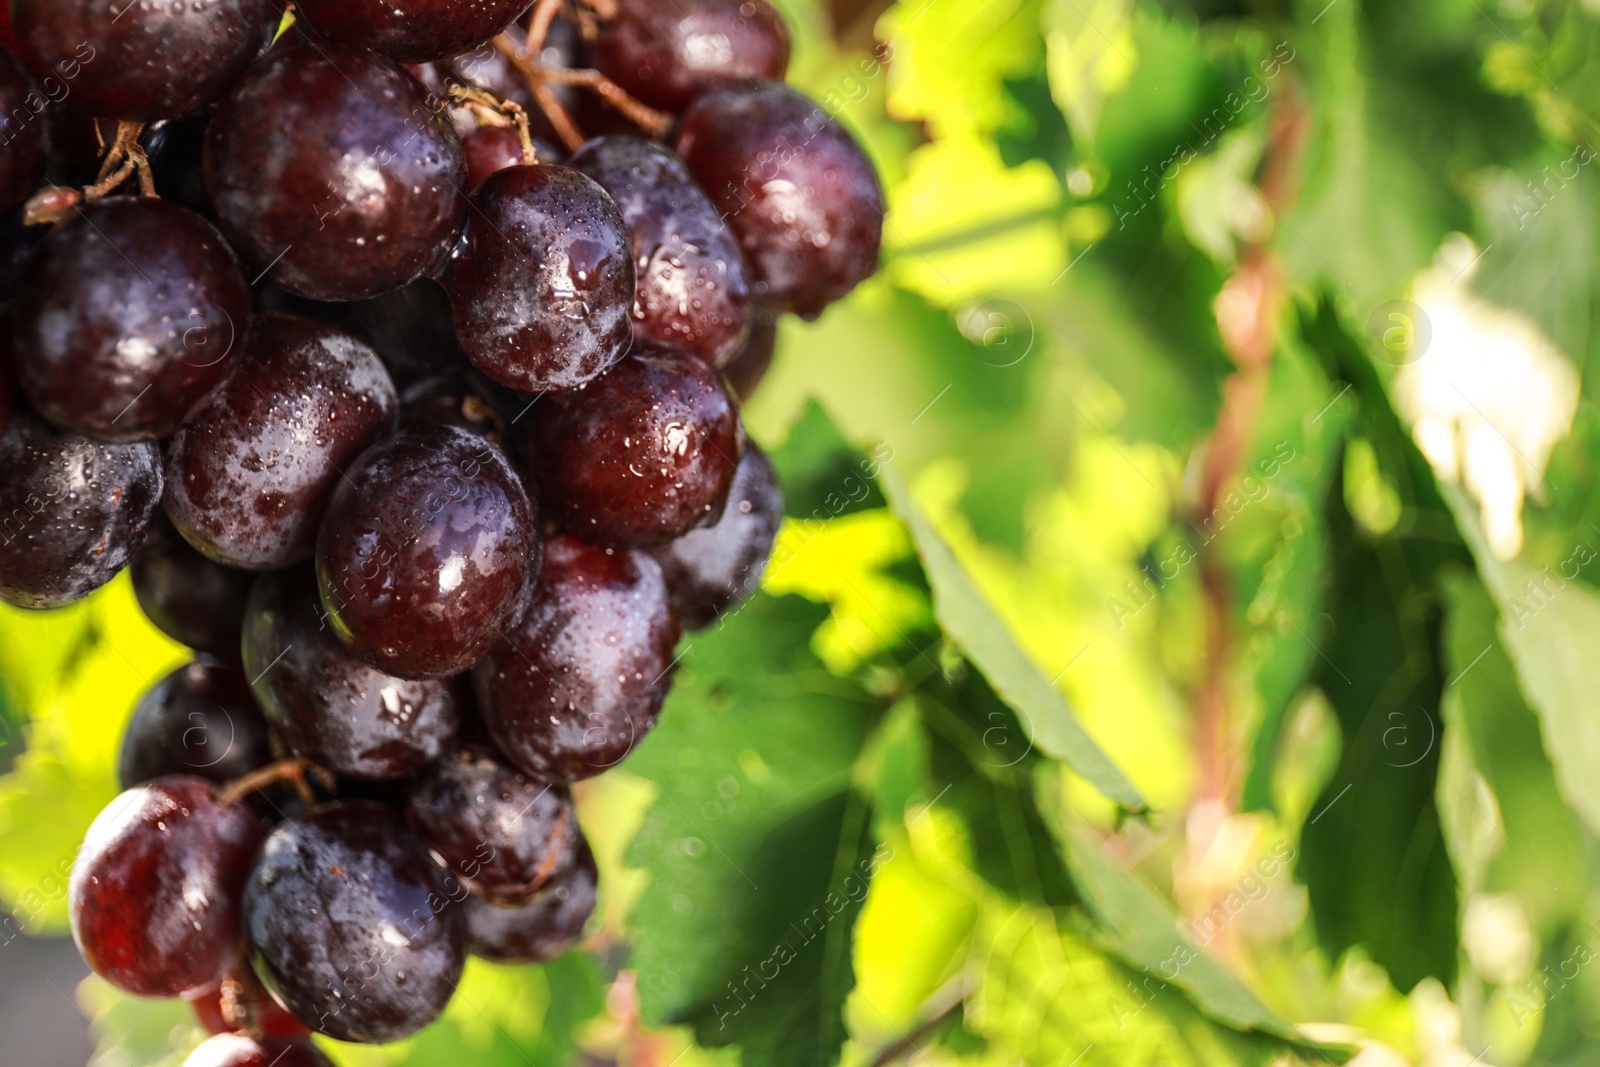 Photo of Fresh ripe juicy grapes growing on branch outdoors, closeup